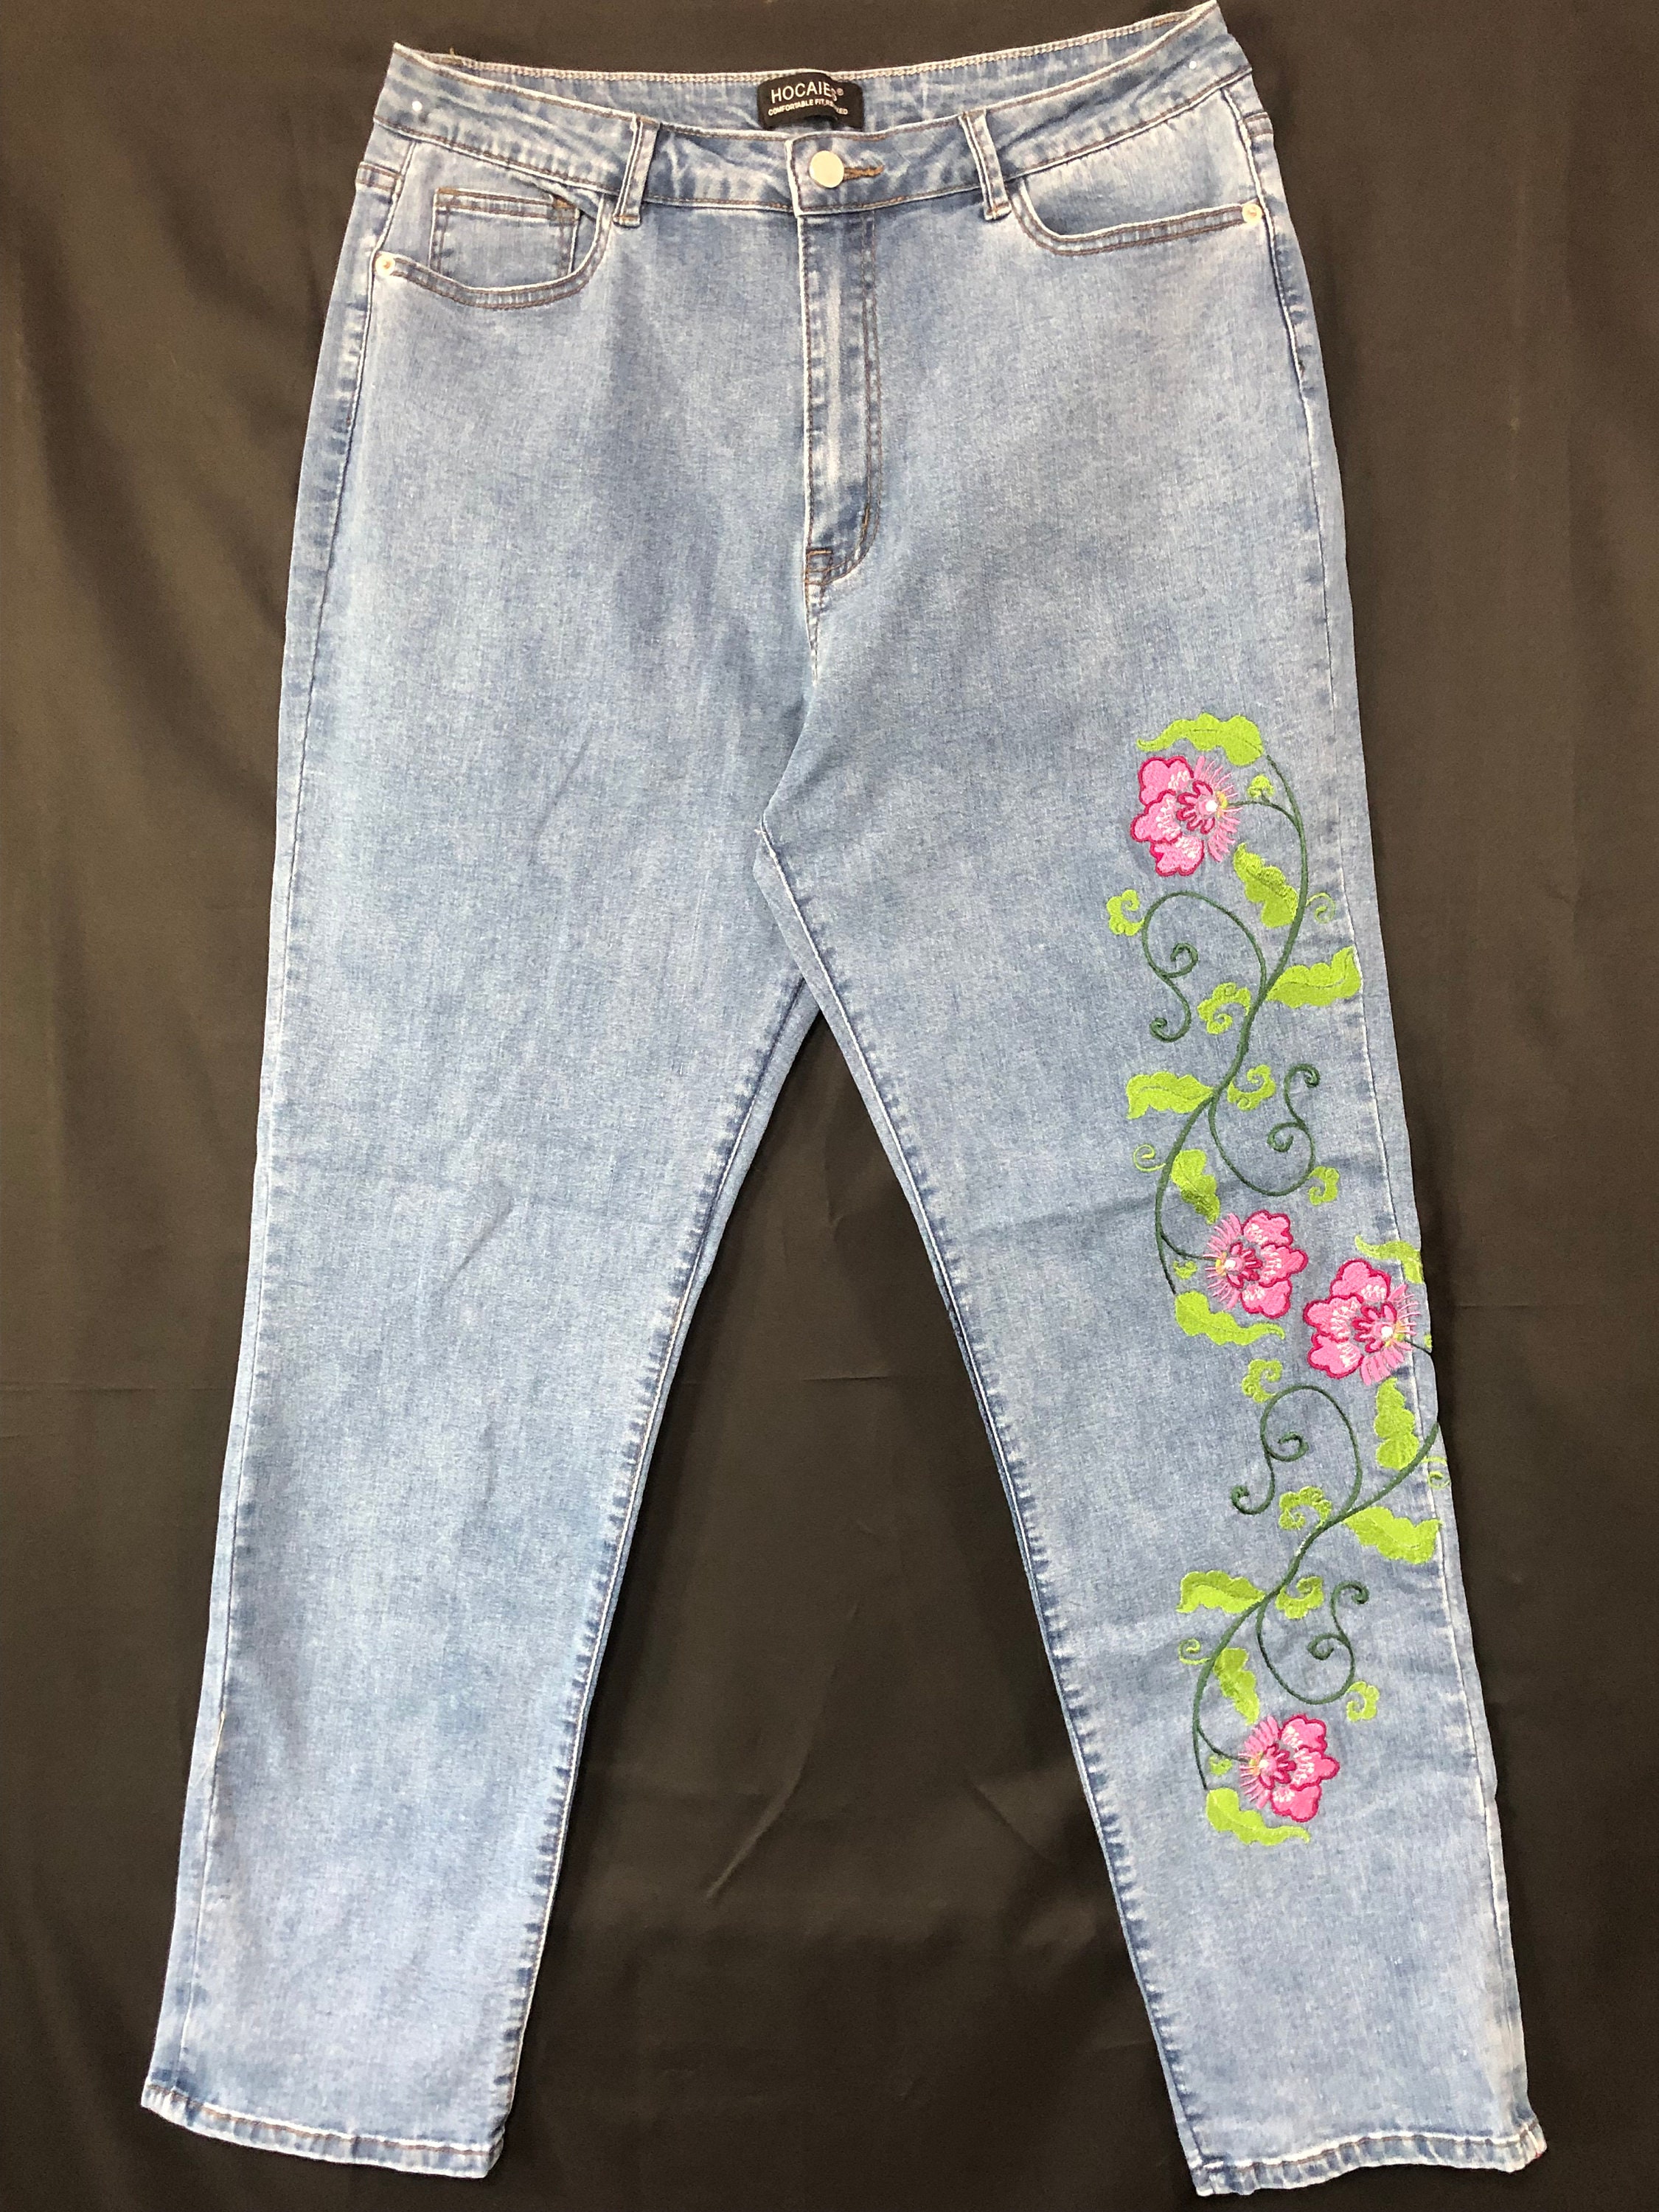 Embroidered Pants   Etsy